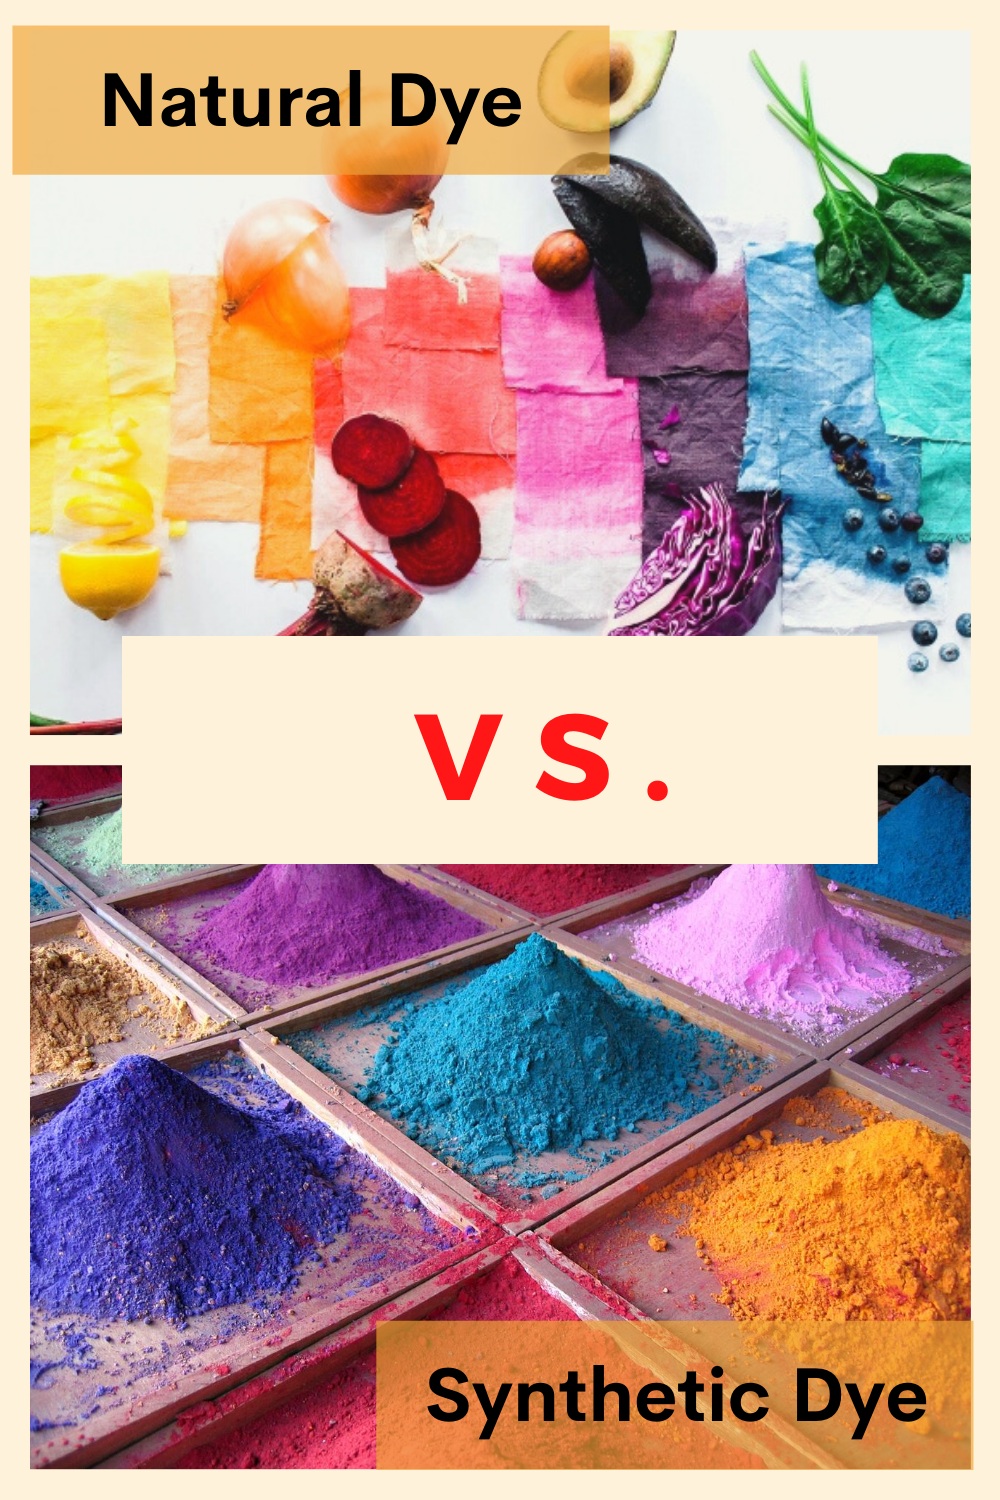 Organic fabric dyes: Eco-friendly alternatives for synthetic dyes